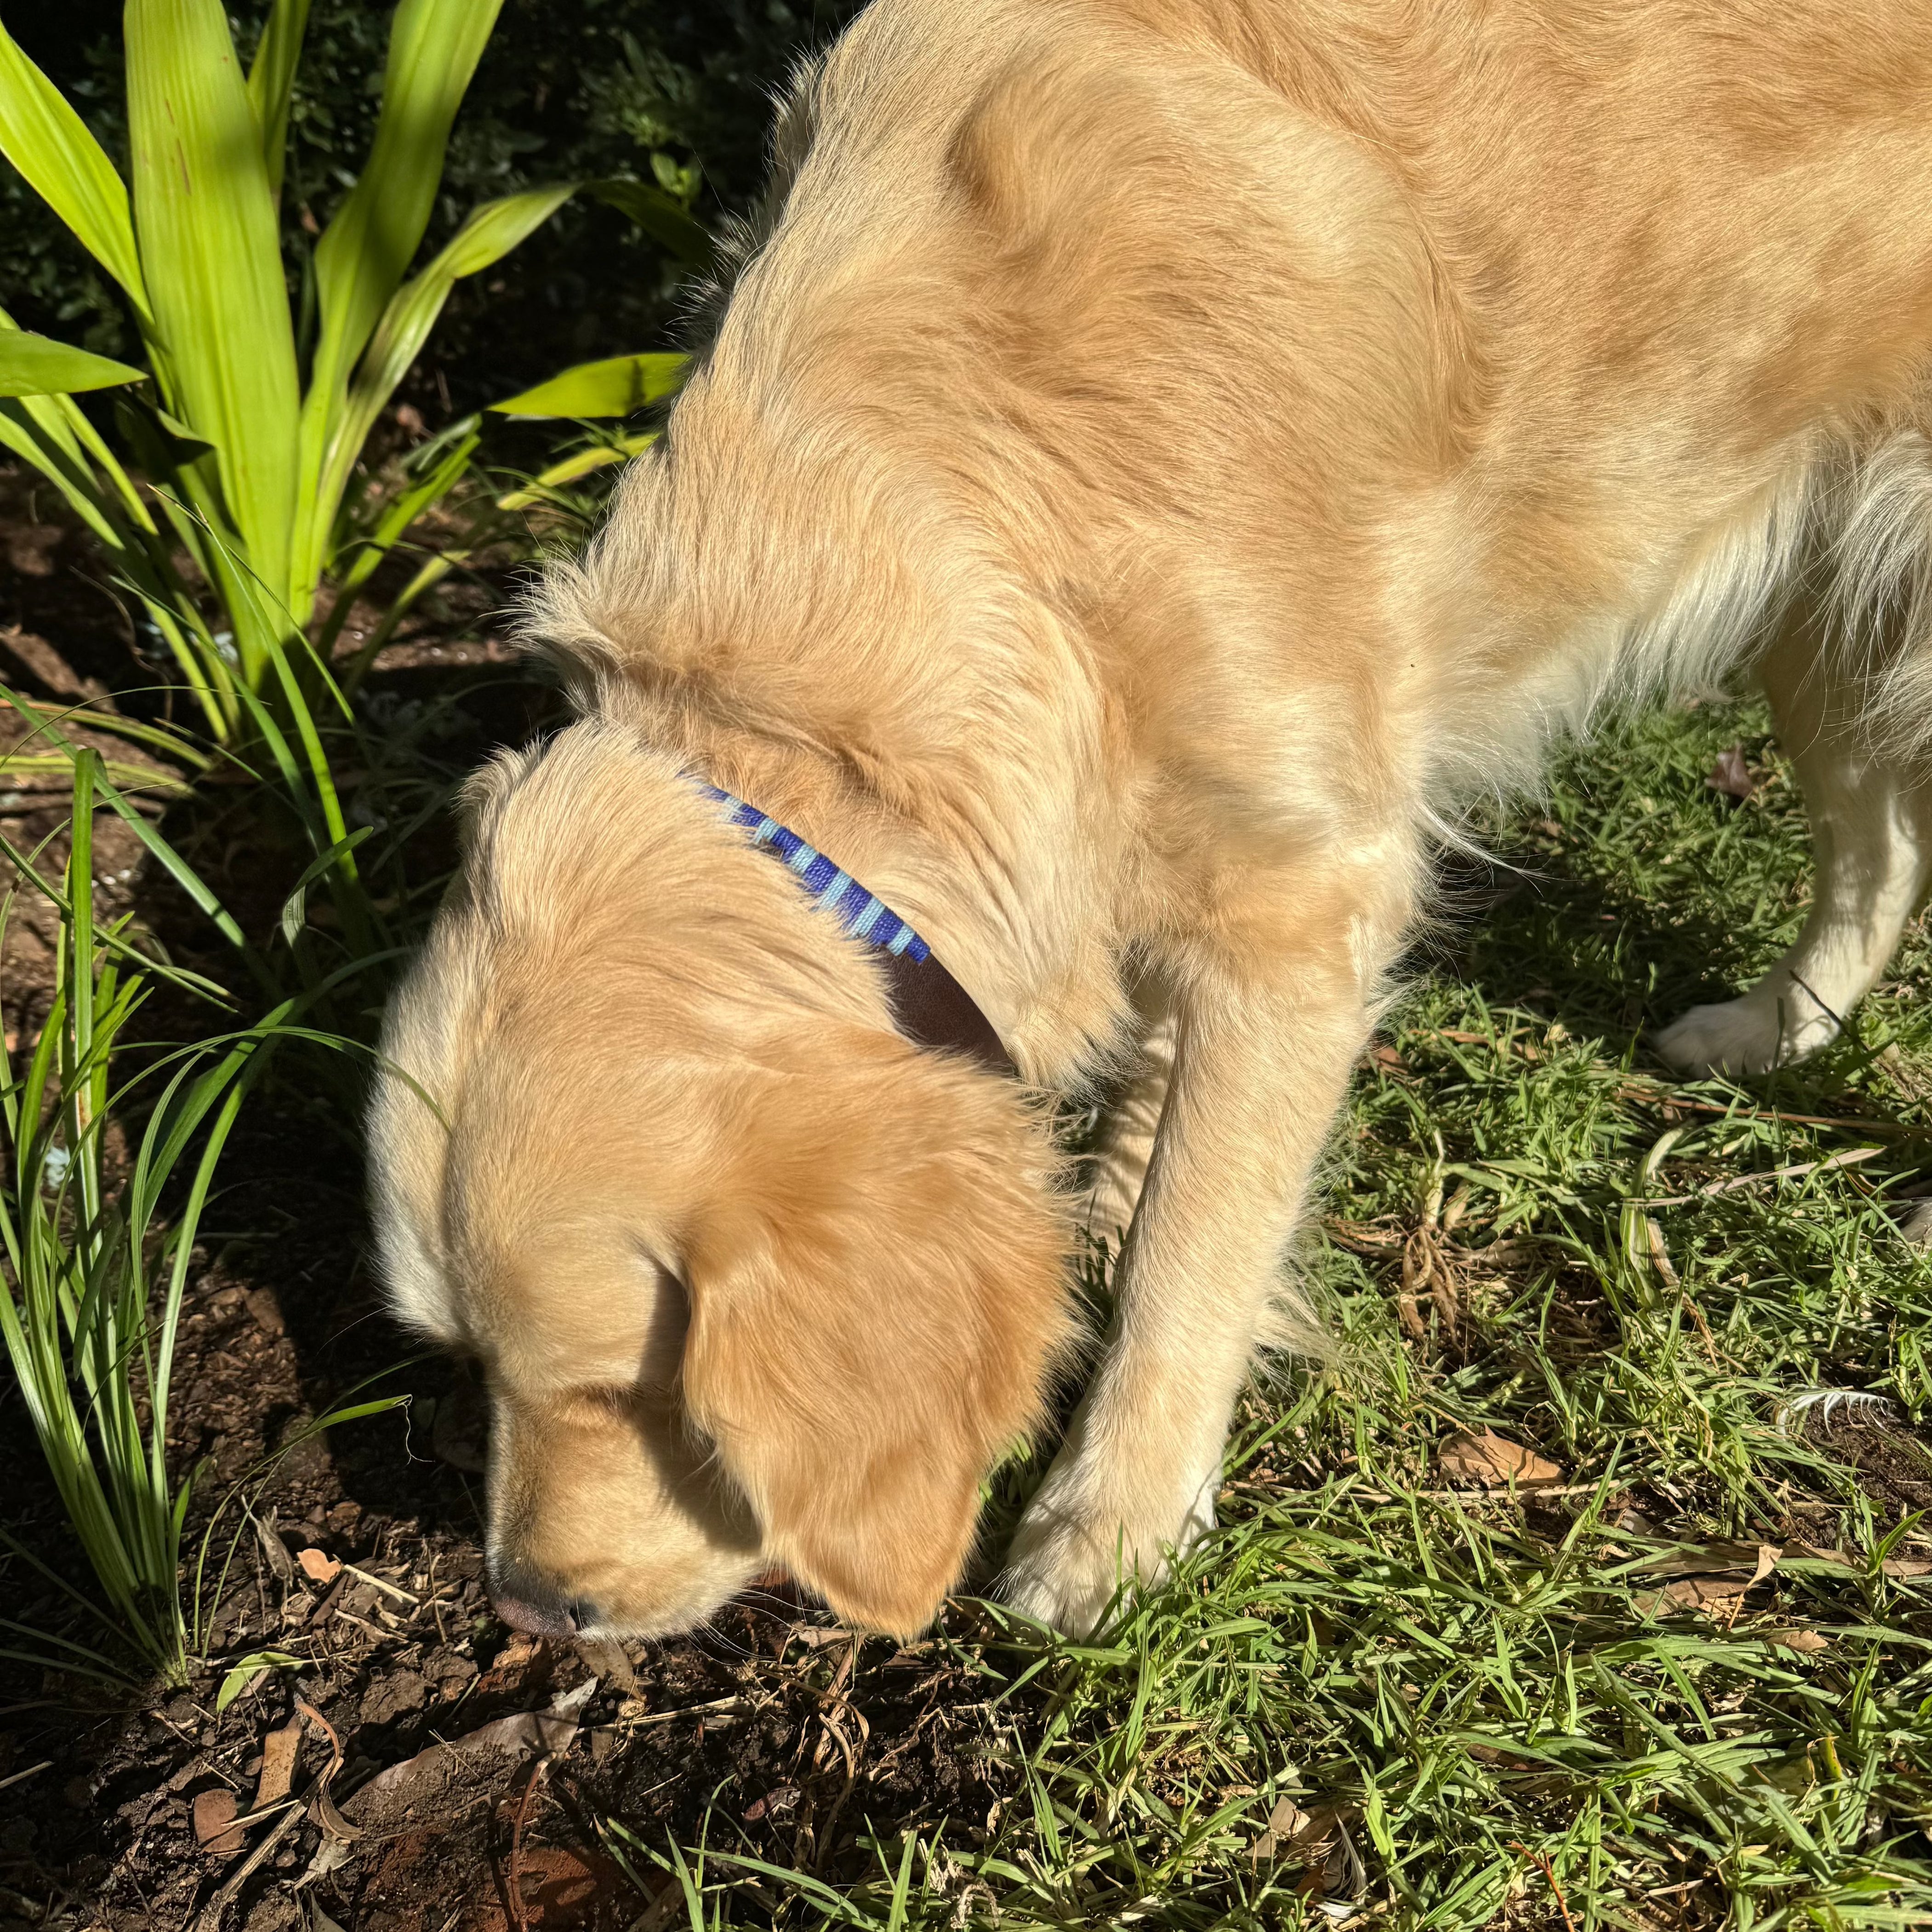 A golden retriever wearing a Georgie Paws Polo Collar - Blues with brass hardware is sniffing the ground in a garden. The dog is surrounded by green grass, some plants, and small brown leaves scattered on the ground. The scene is well-lit, indicating it is during daytime.